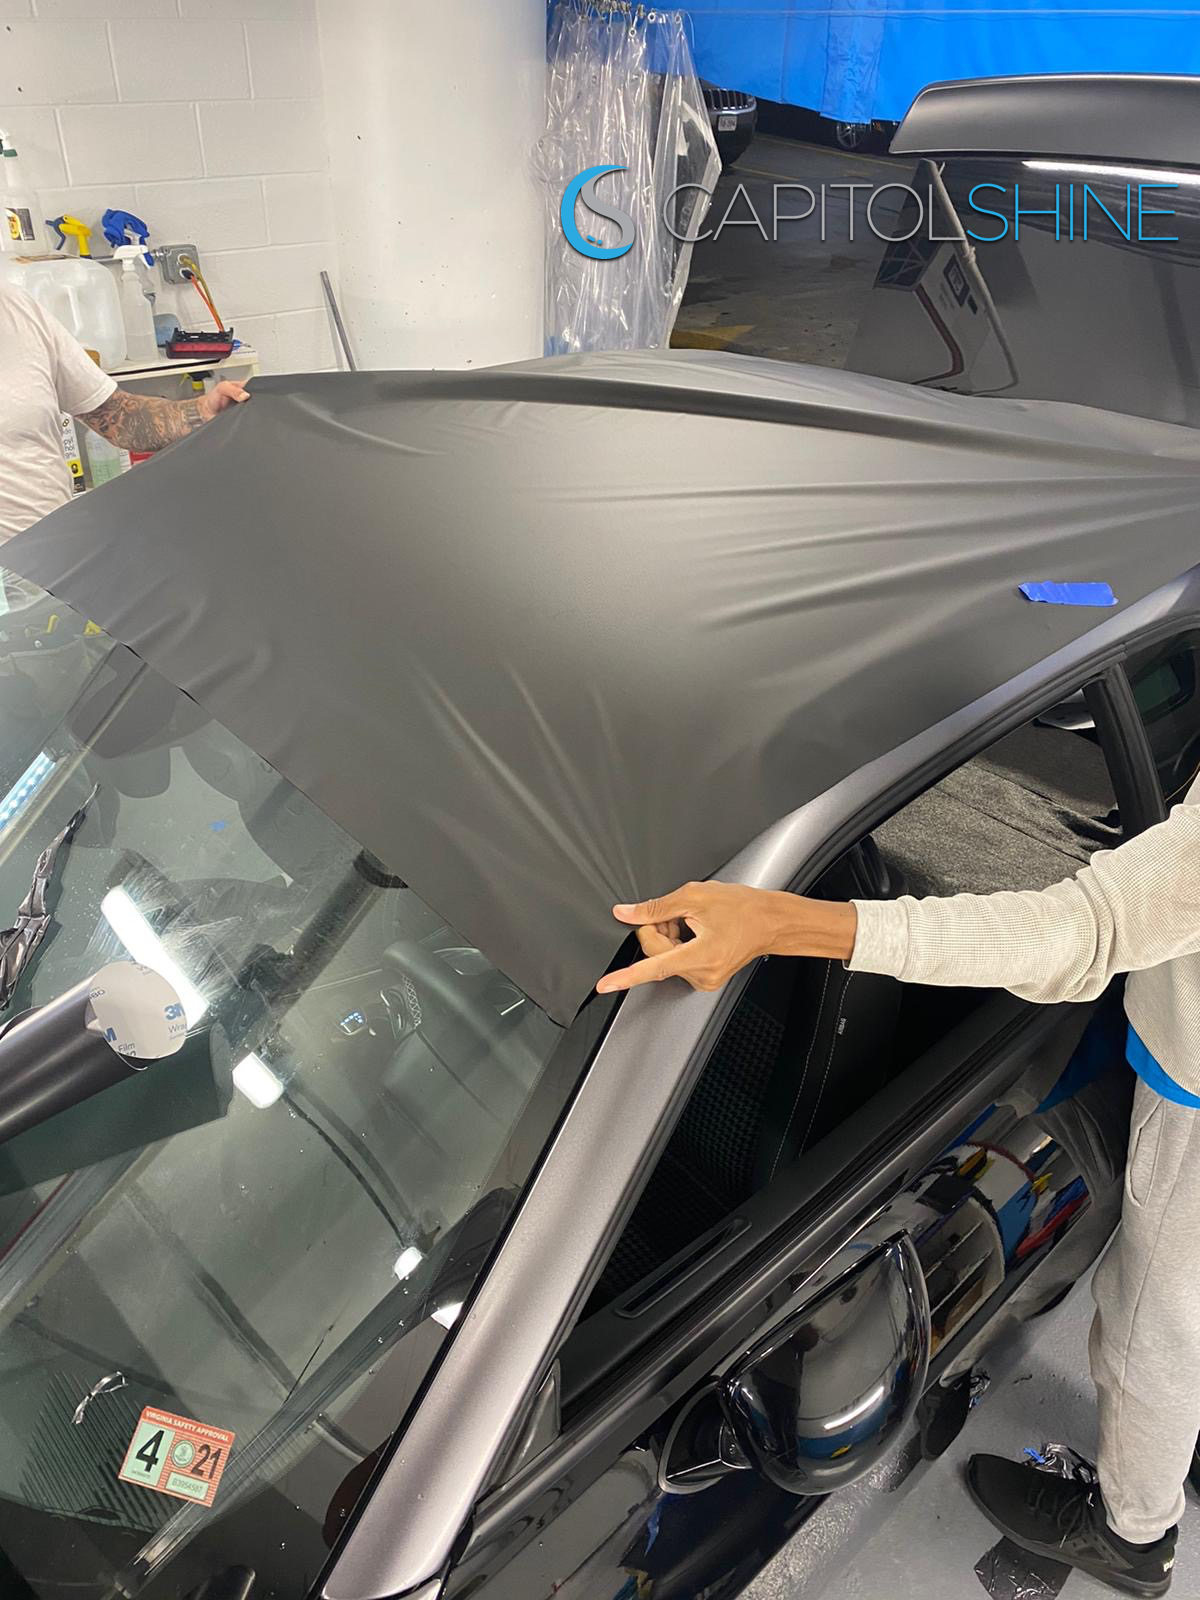 But Which One? Choosing Your Paint Protection Film/Clear Bra Package —  Capitol Shine Washington DC Paint Protection Film and Ceramic Coatings